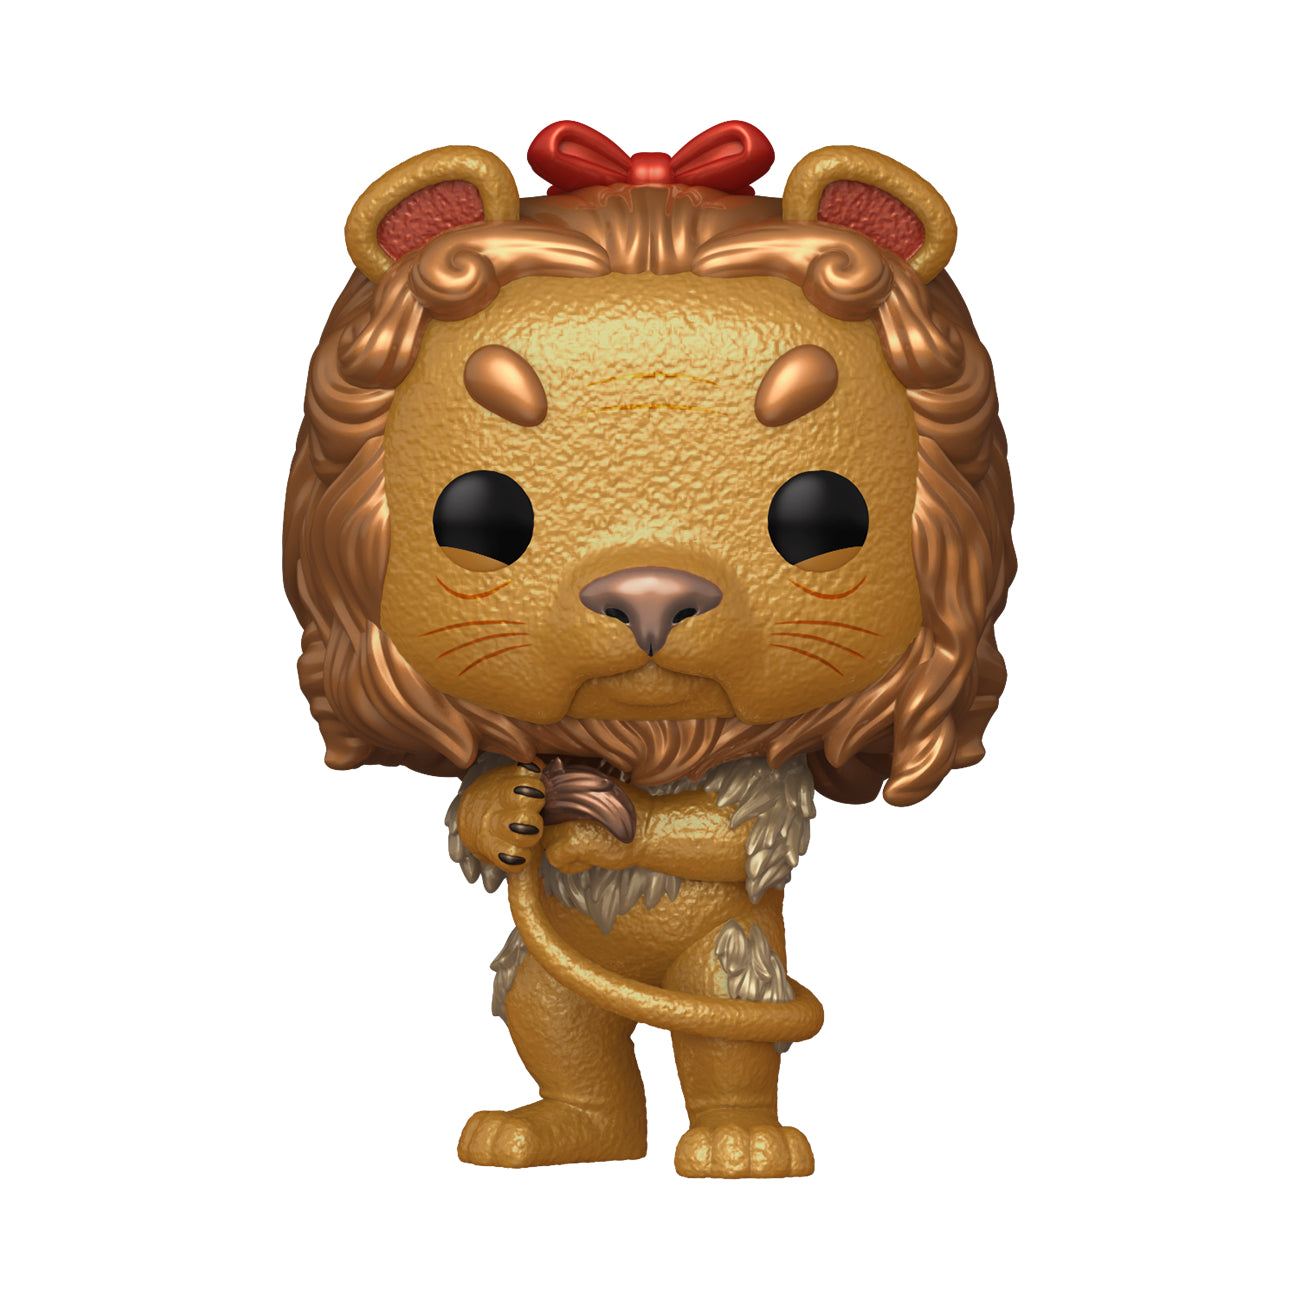 Funko Pop! Movies: The Wizard of Oz 85th Anniversary Cowardly Lion Vinyl Figure with Chance of Chase